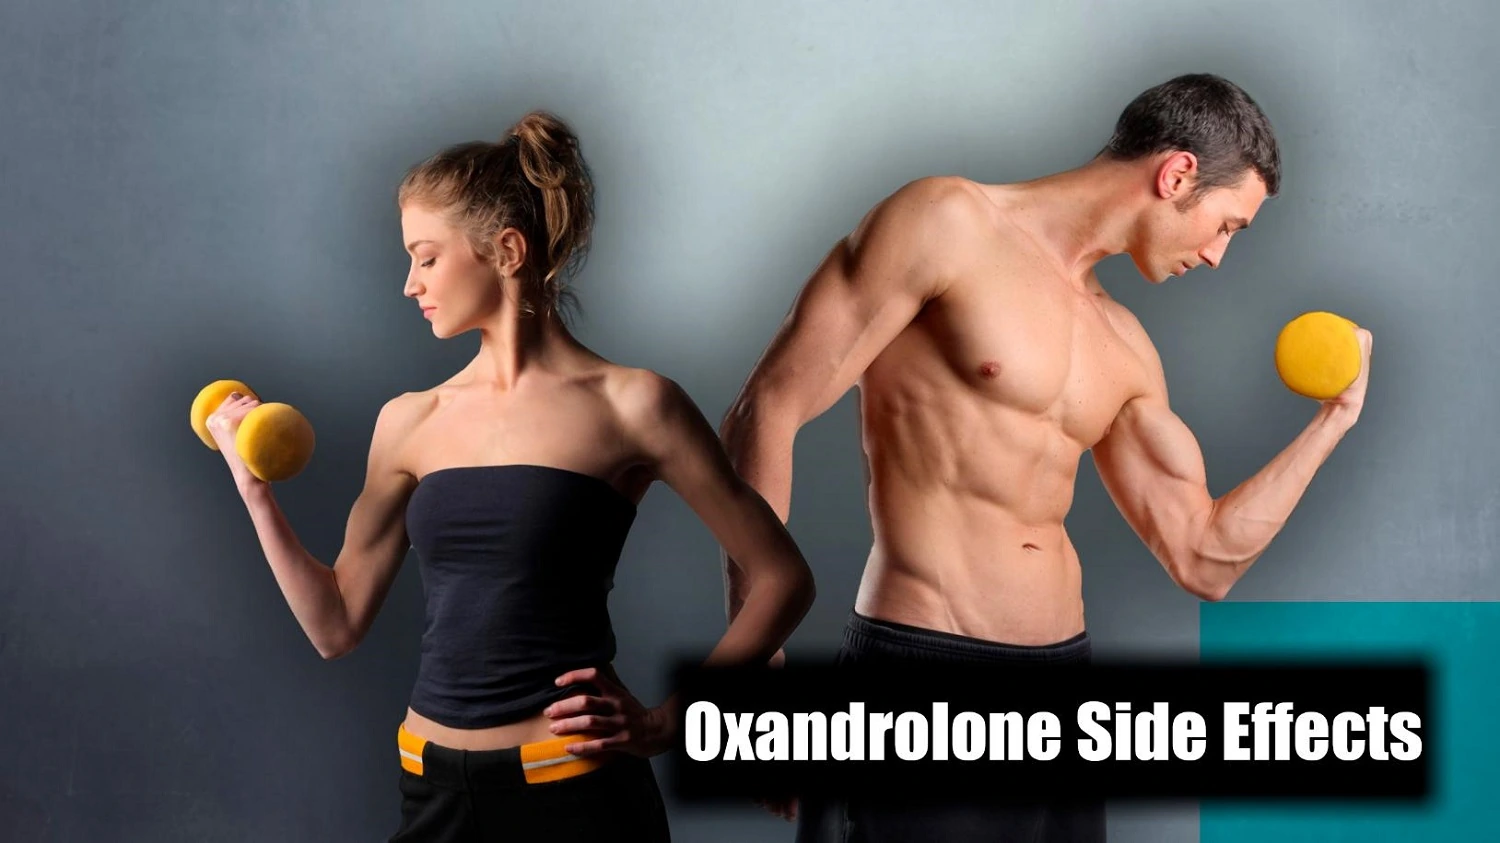 Oxandrolone side effects